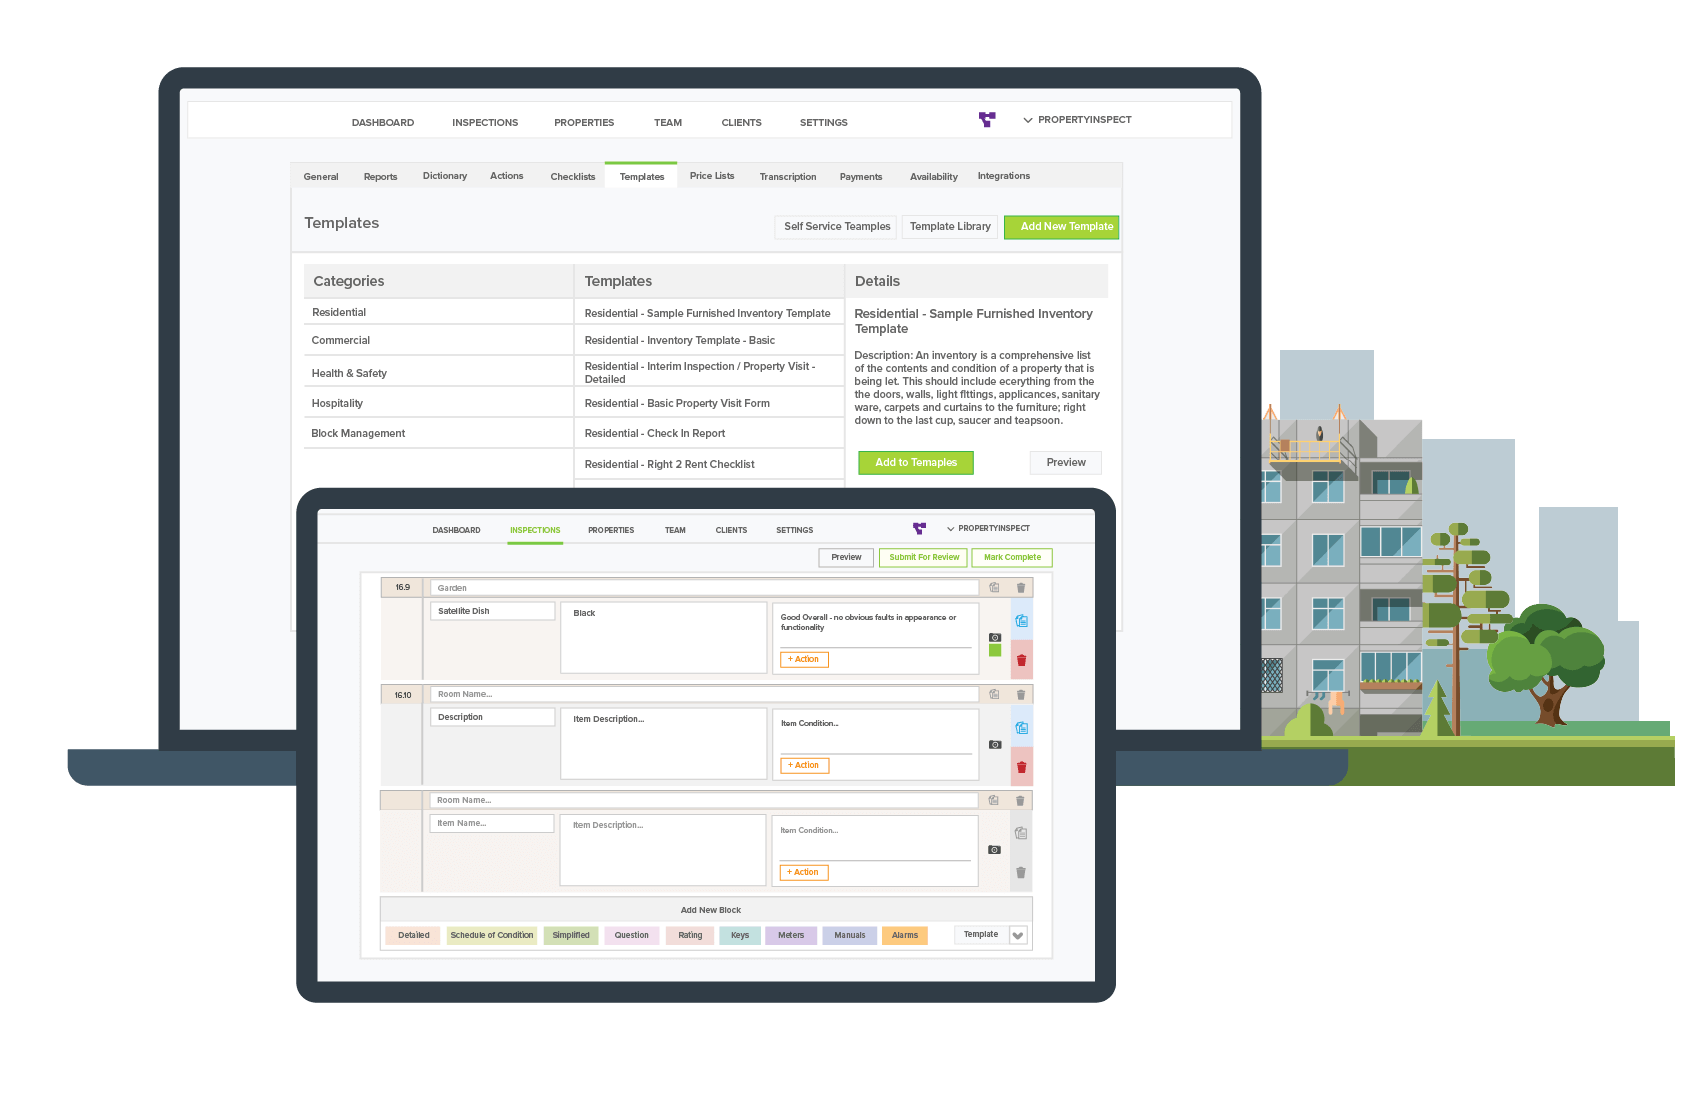 Unlimited Customisable Reports